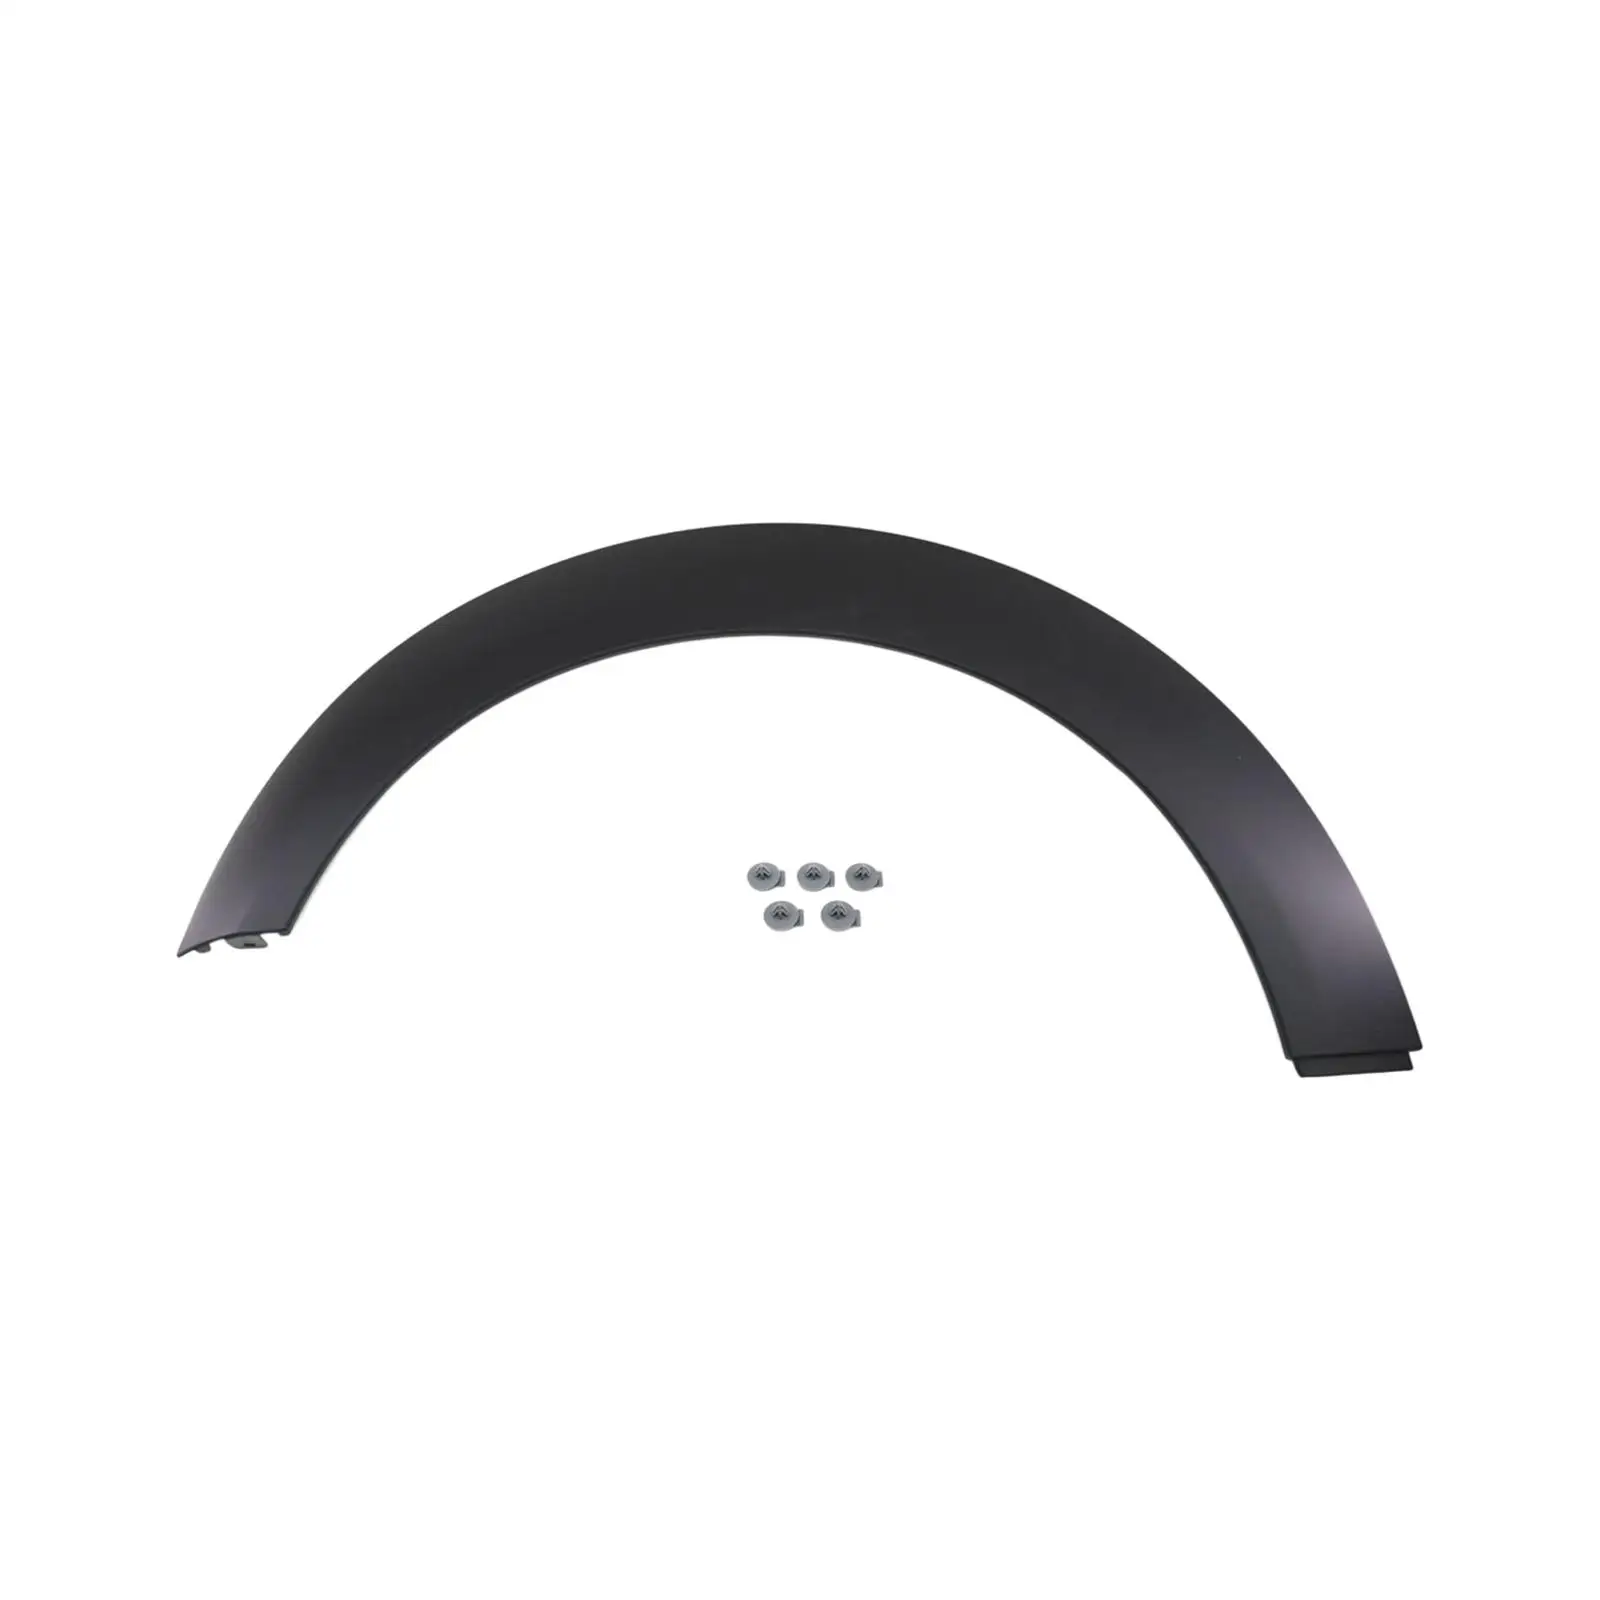 Vehicle Wheel Eyebrow Arch, Black Side Mudguard Mud Flaps Protector, for Mini R56 Durable Accessory